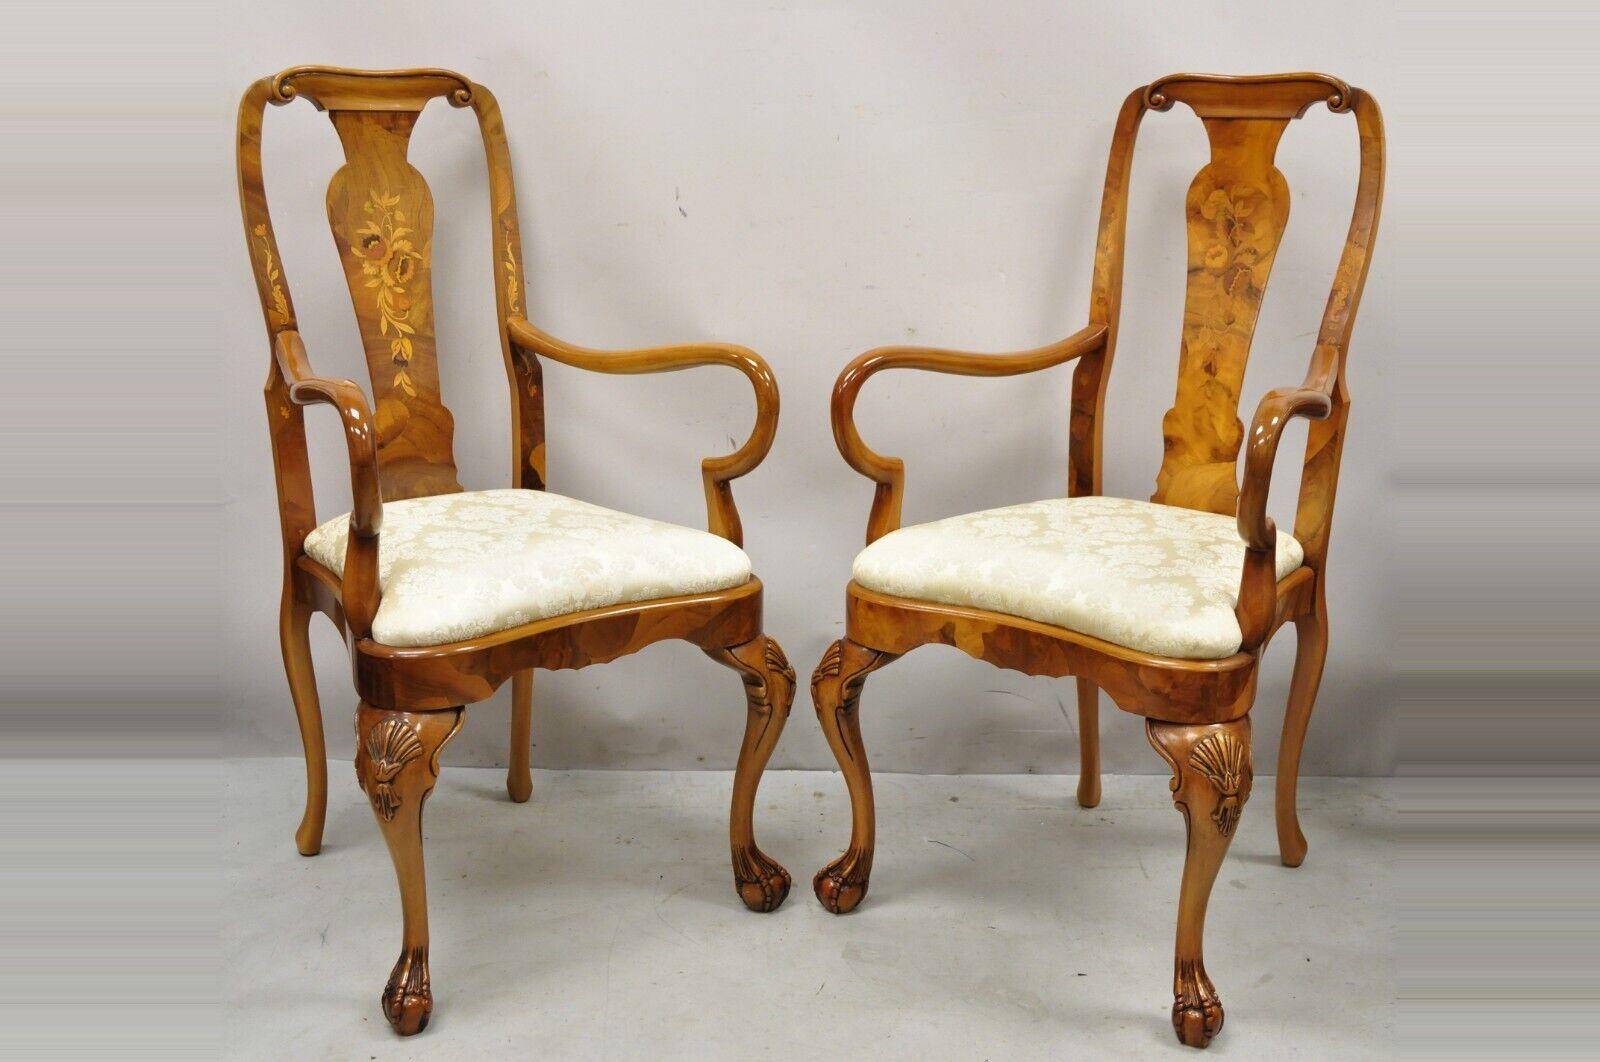 Vintage Queen Anne style Italian burl patchwork floral inlay arm chairs - a pair. Item features floral inlay to backrests, burl patchwork frames, carved ball and claw feet, fan/shell carved knees, very nice pair, quality Italian craftsmanship, great